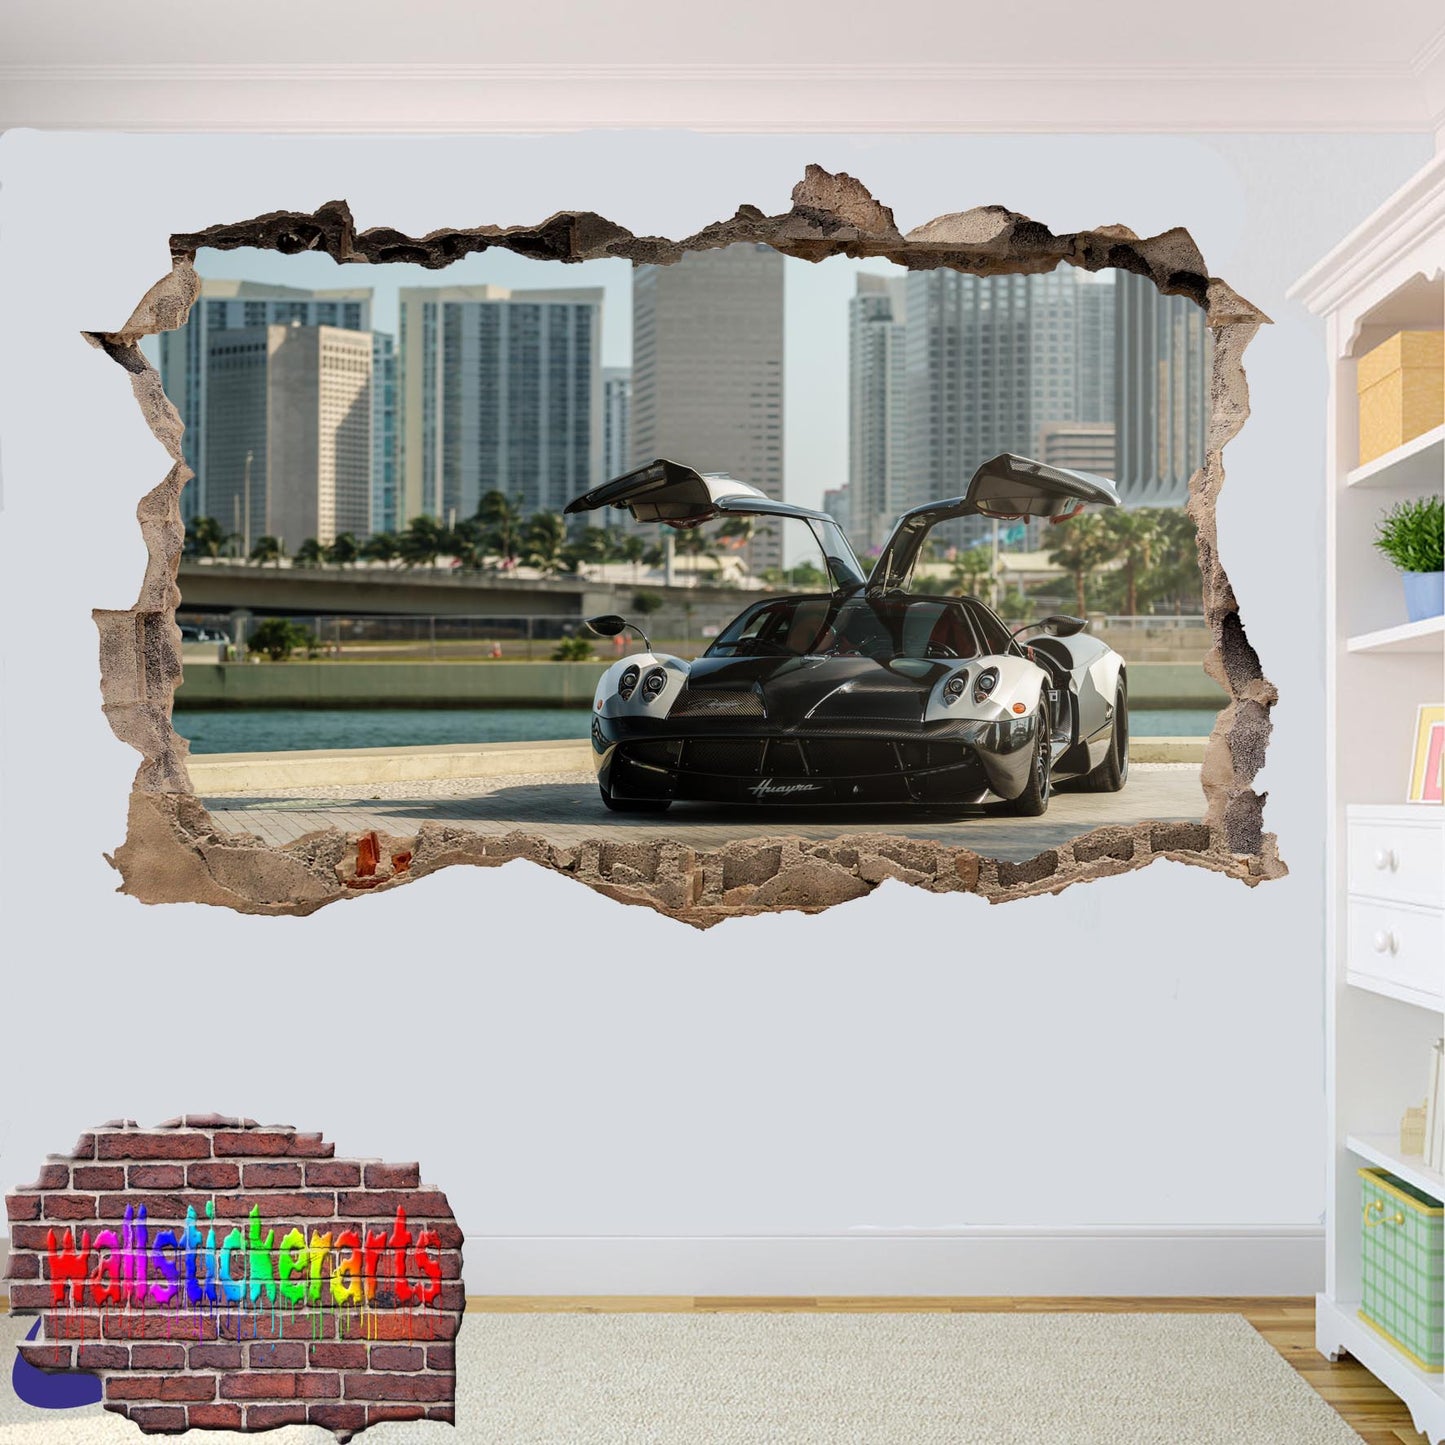 PAGANI WALL STICKER mural decal poster